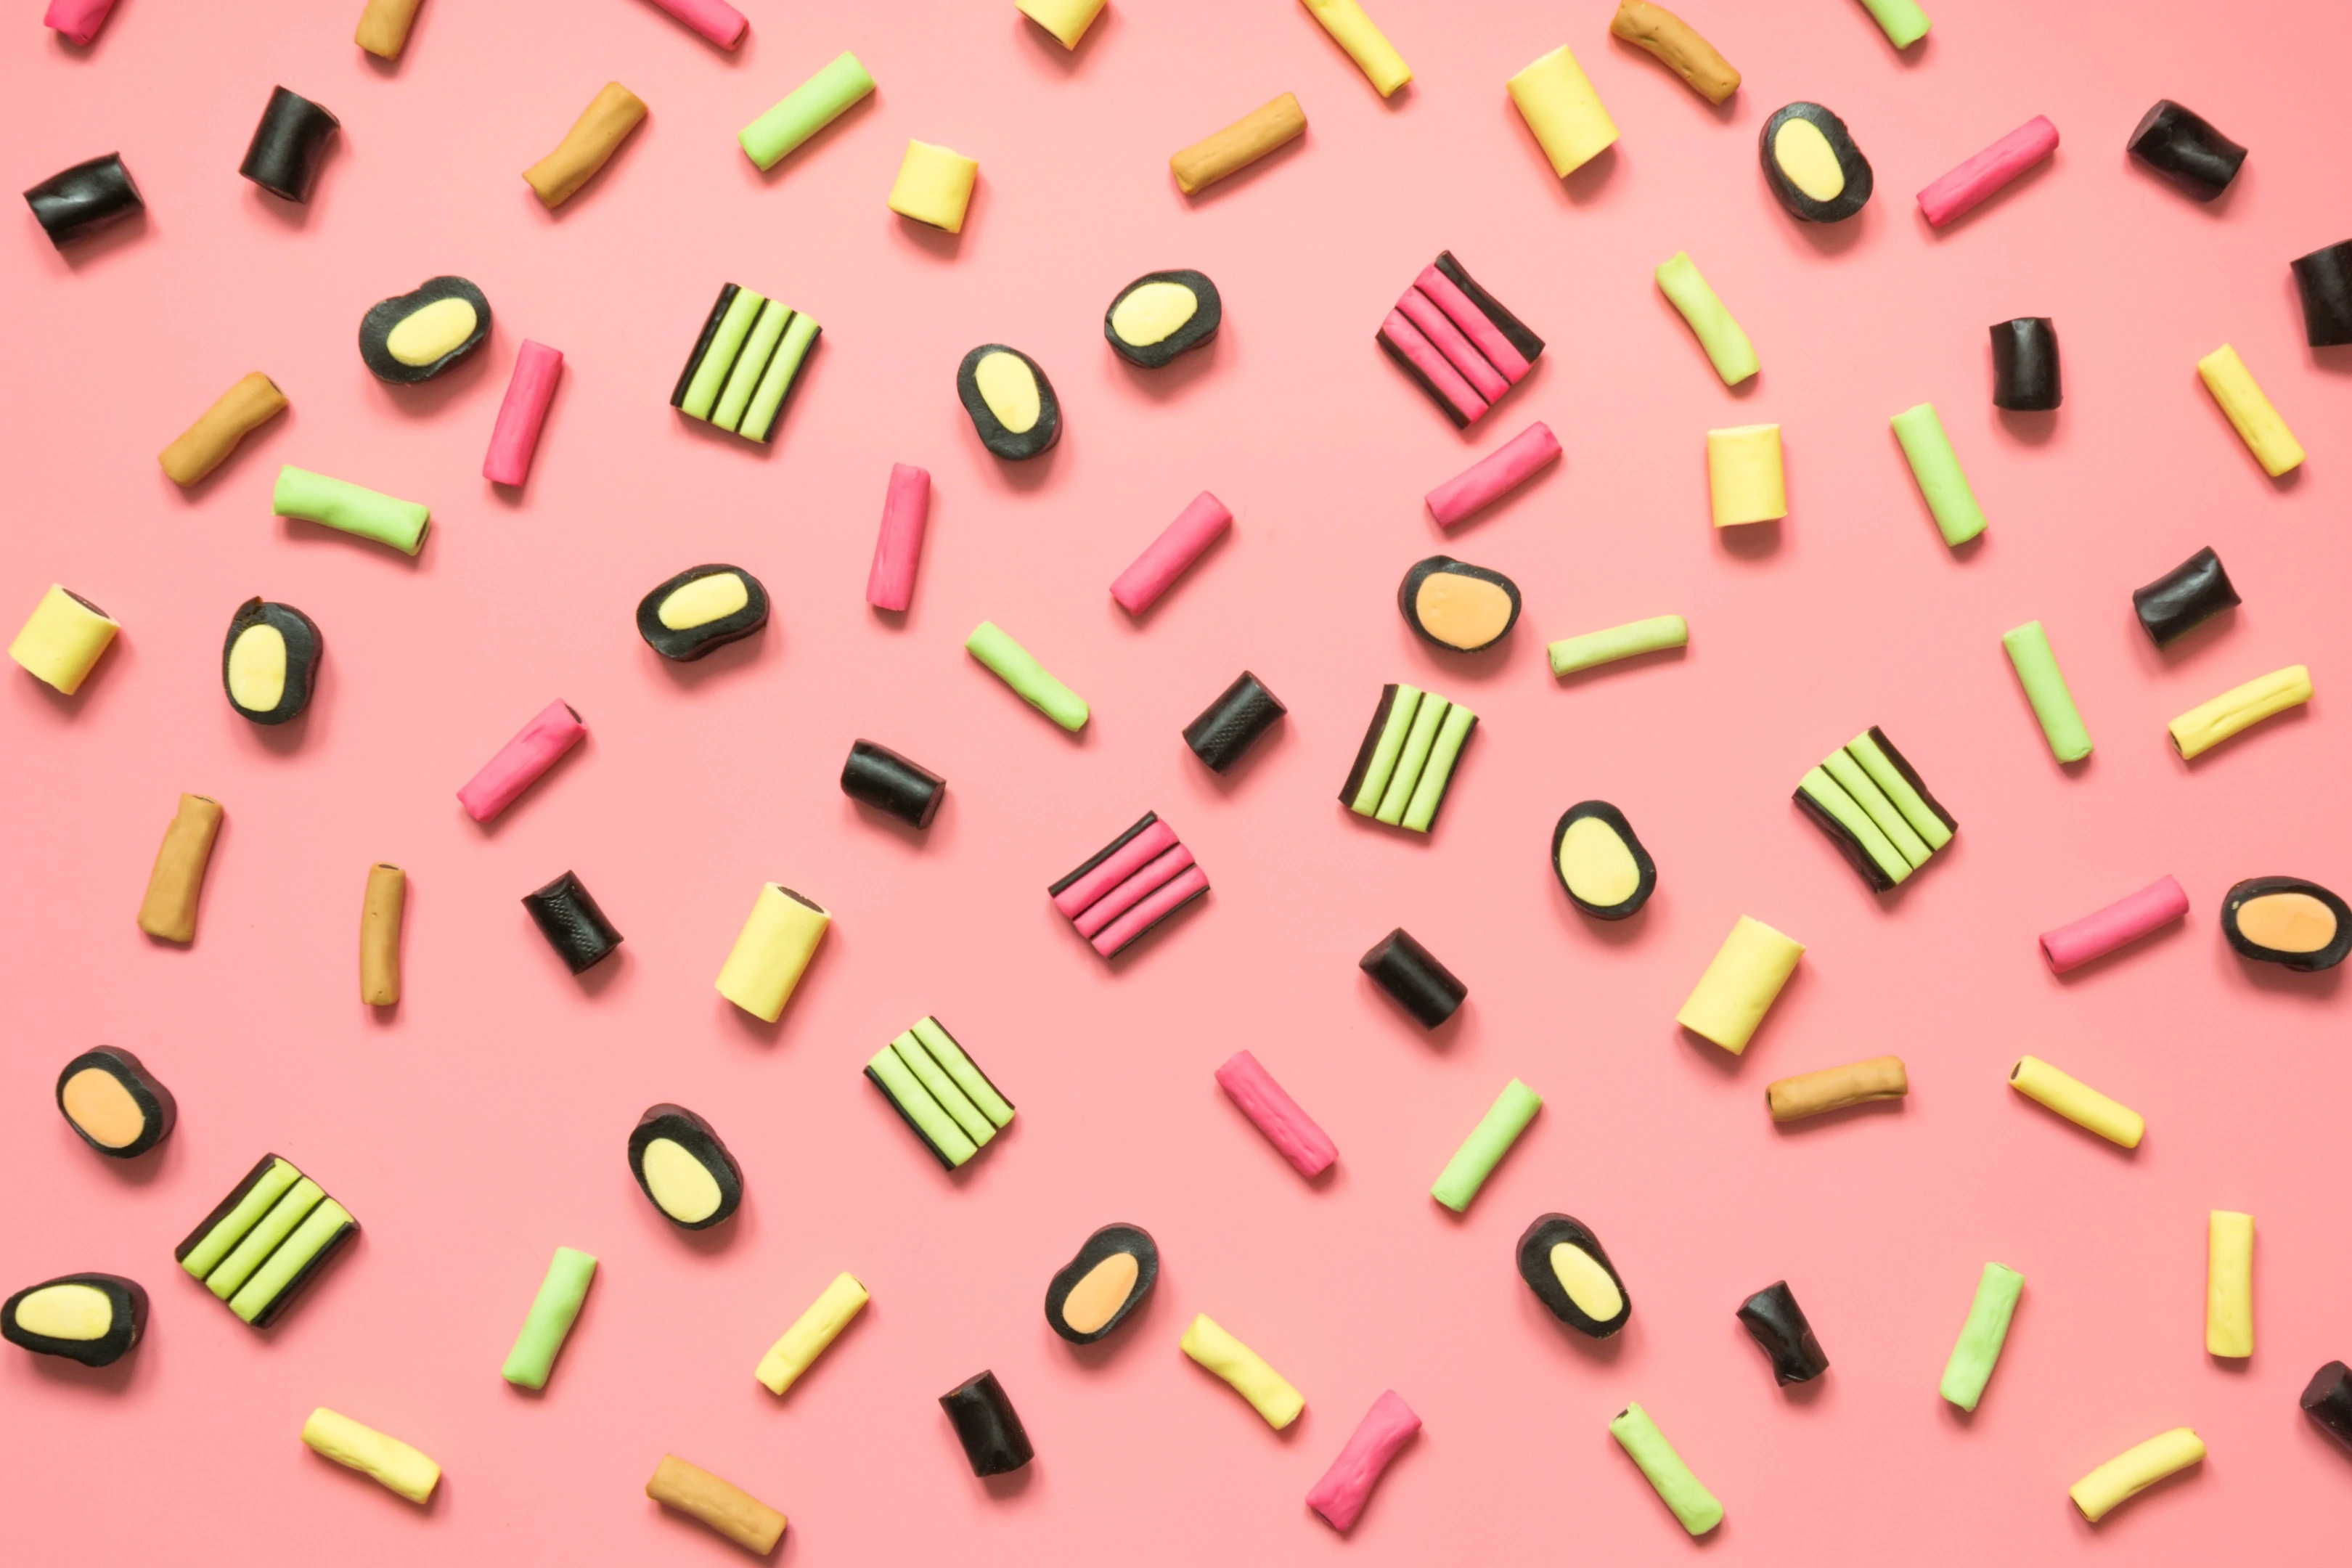 Colorful lollipop and licorice candy assortment on pink background